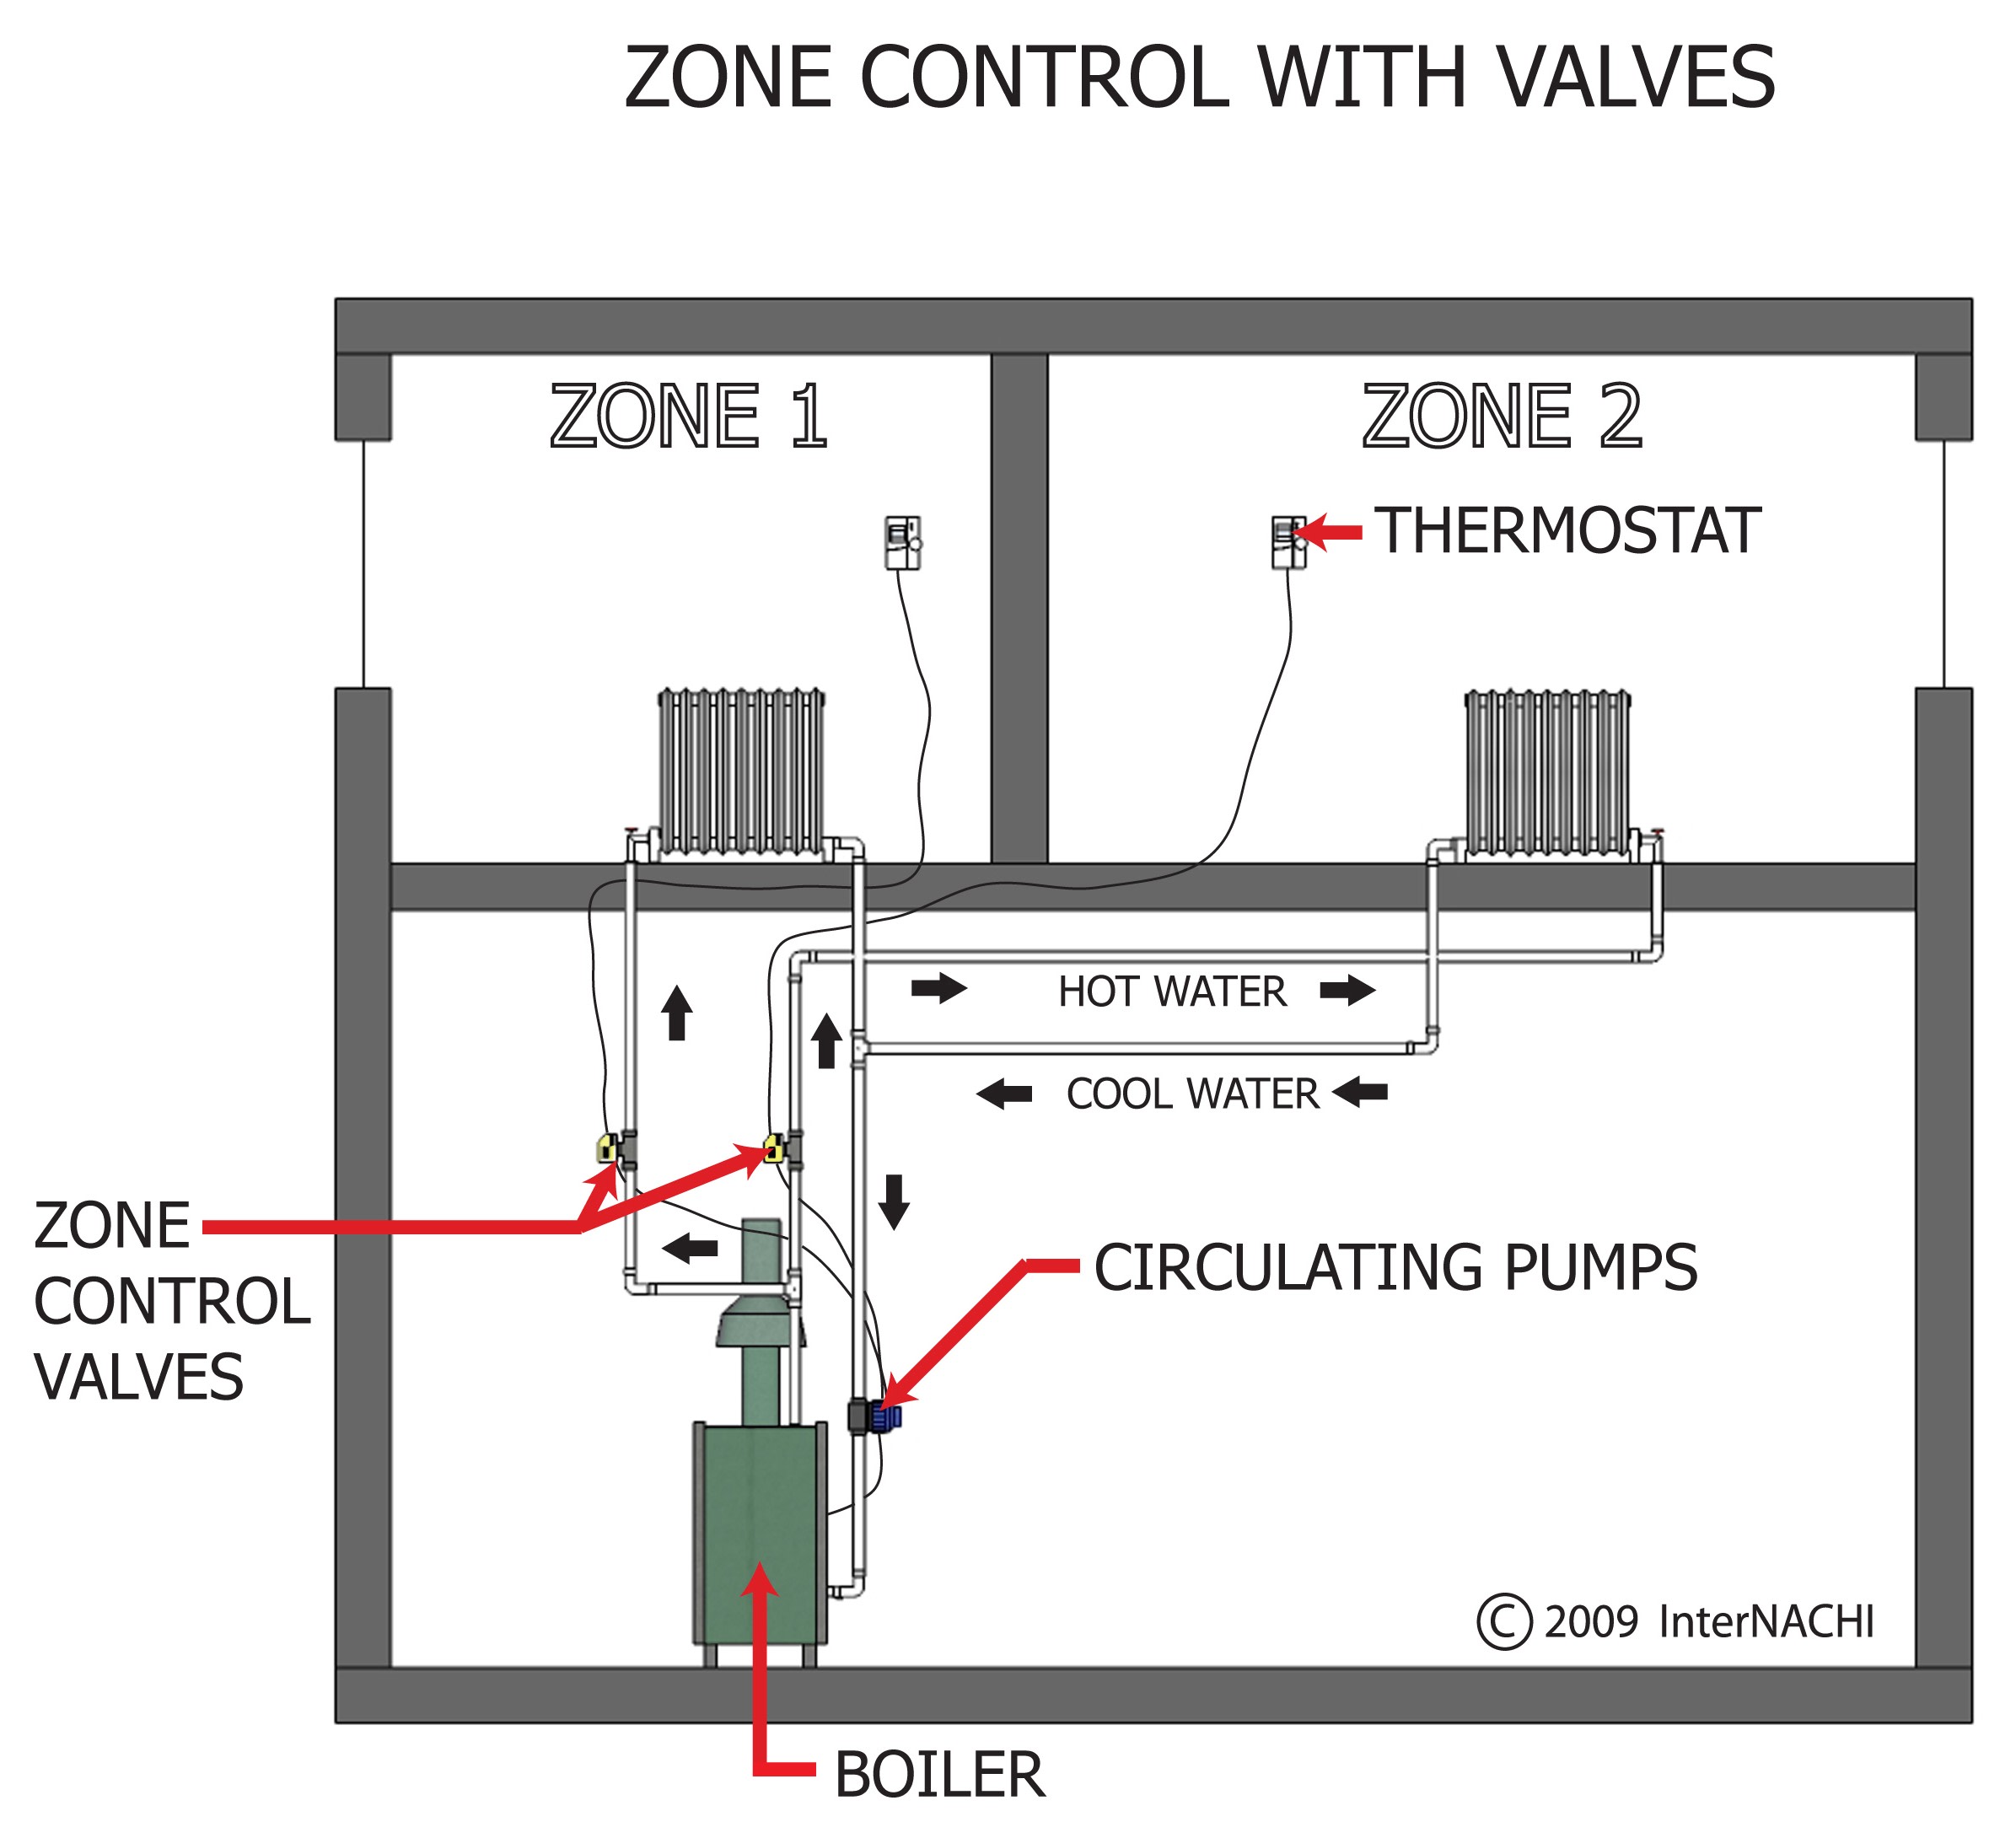 Zone control with valves.